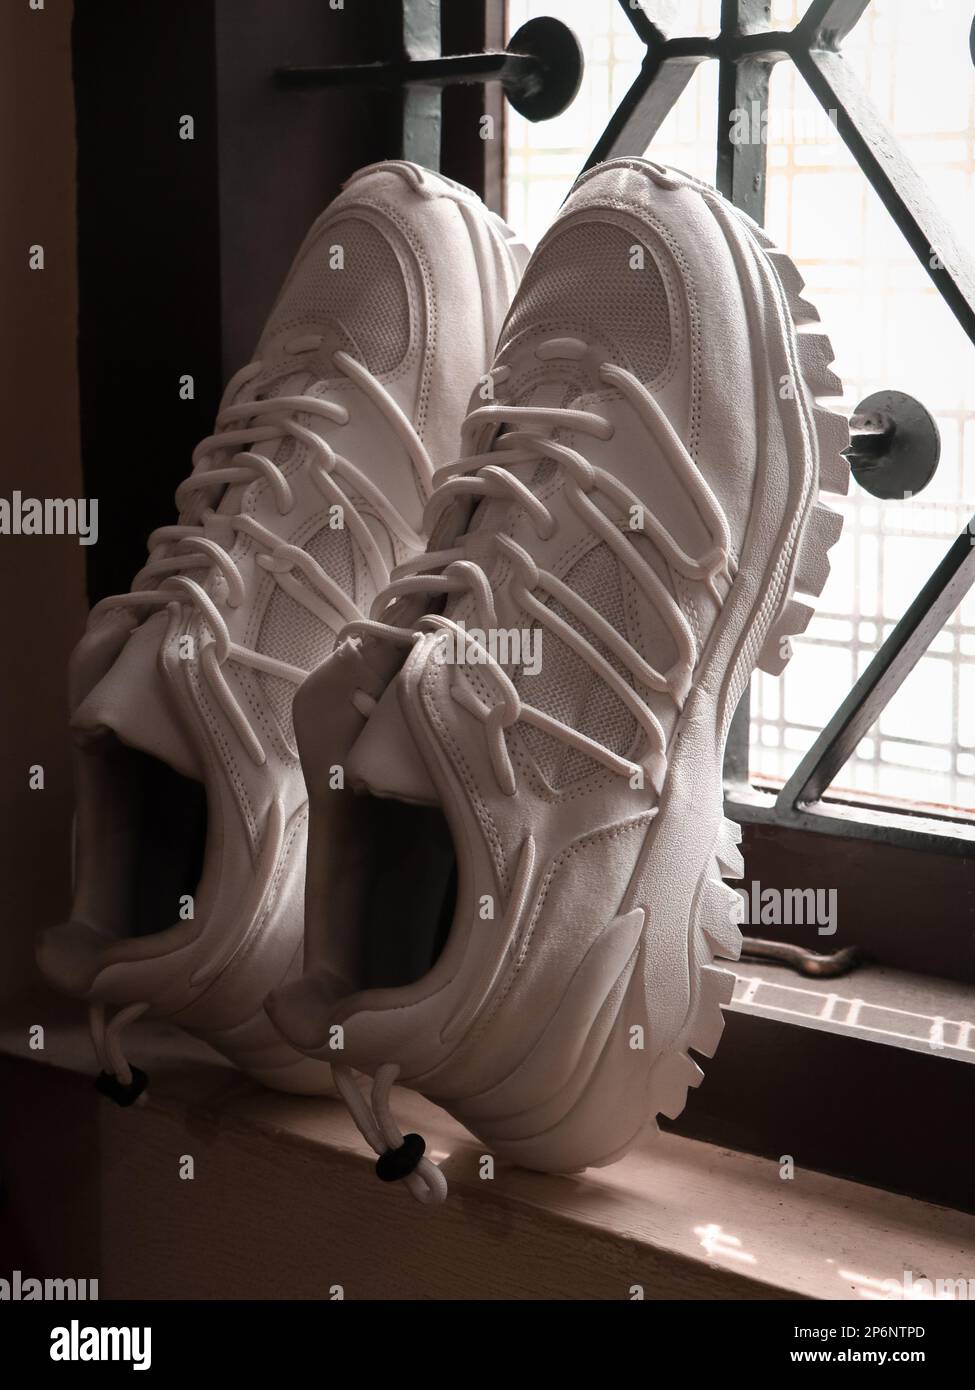 clean white sports running track shoes with unique shoelace design kept ...